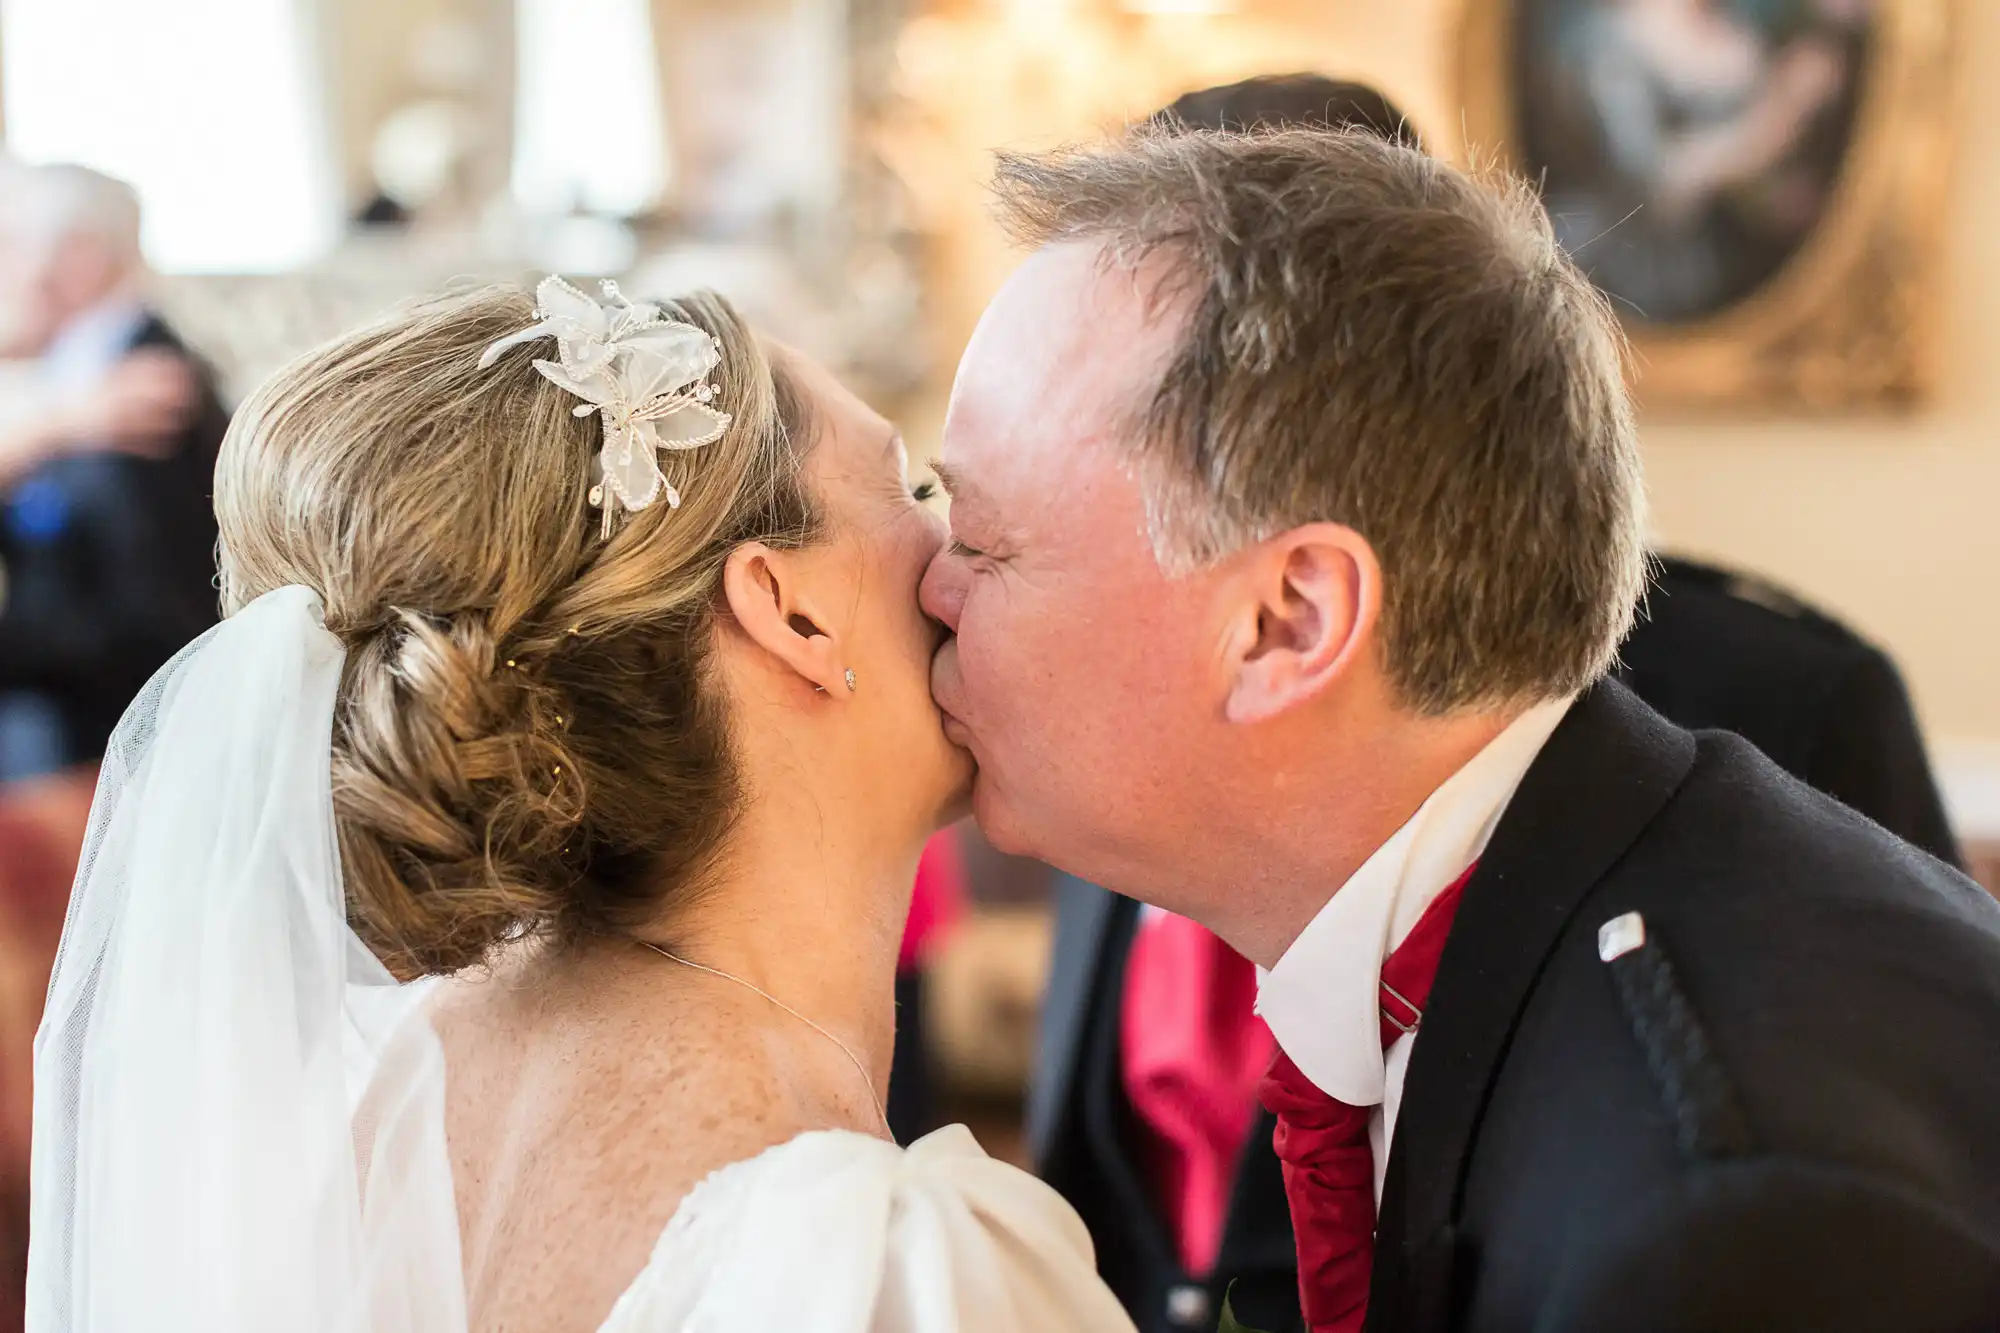 A bride and groom kiss tenderly on their wedding day, surrounded by a blurred background of guests.